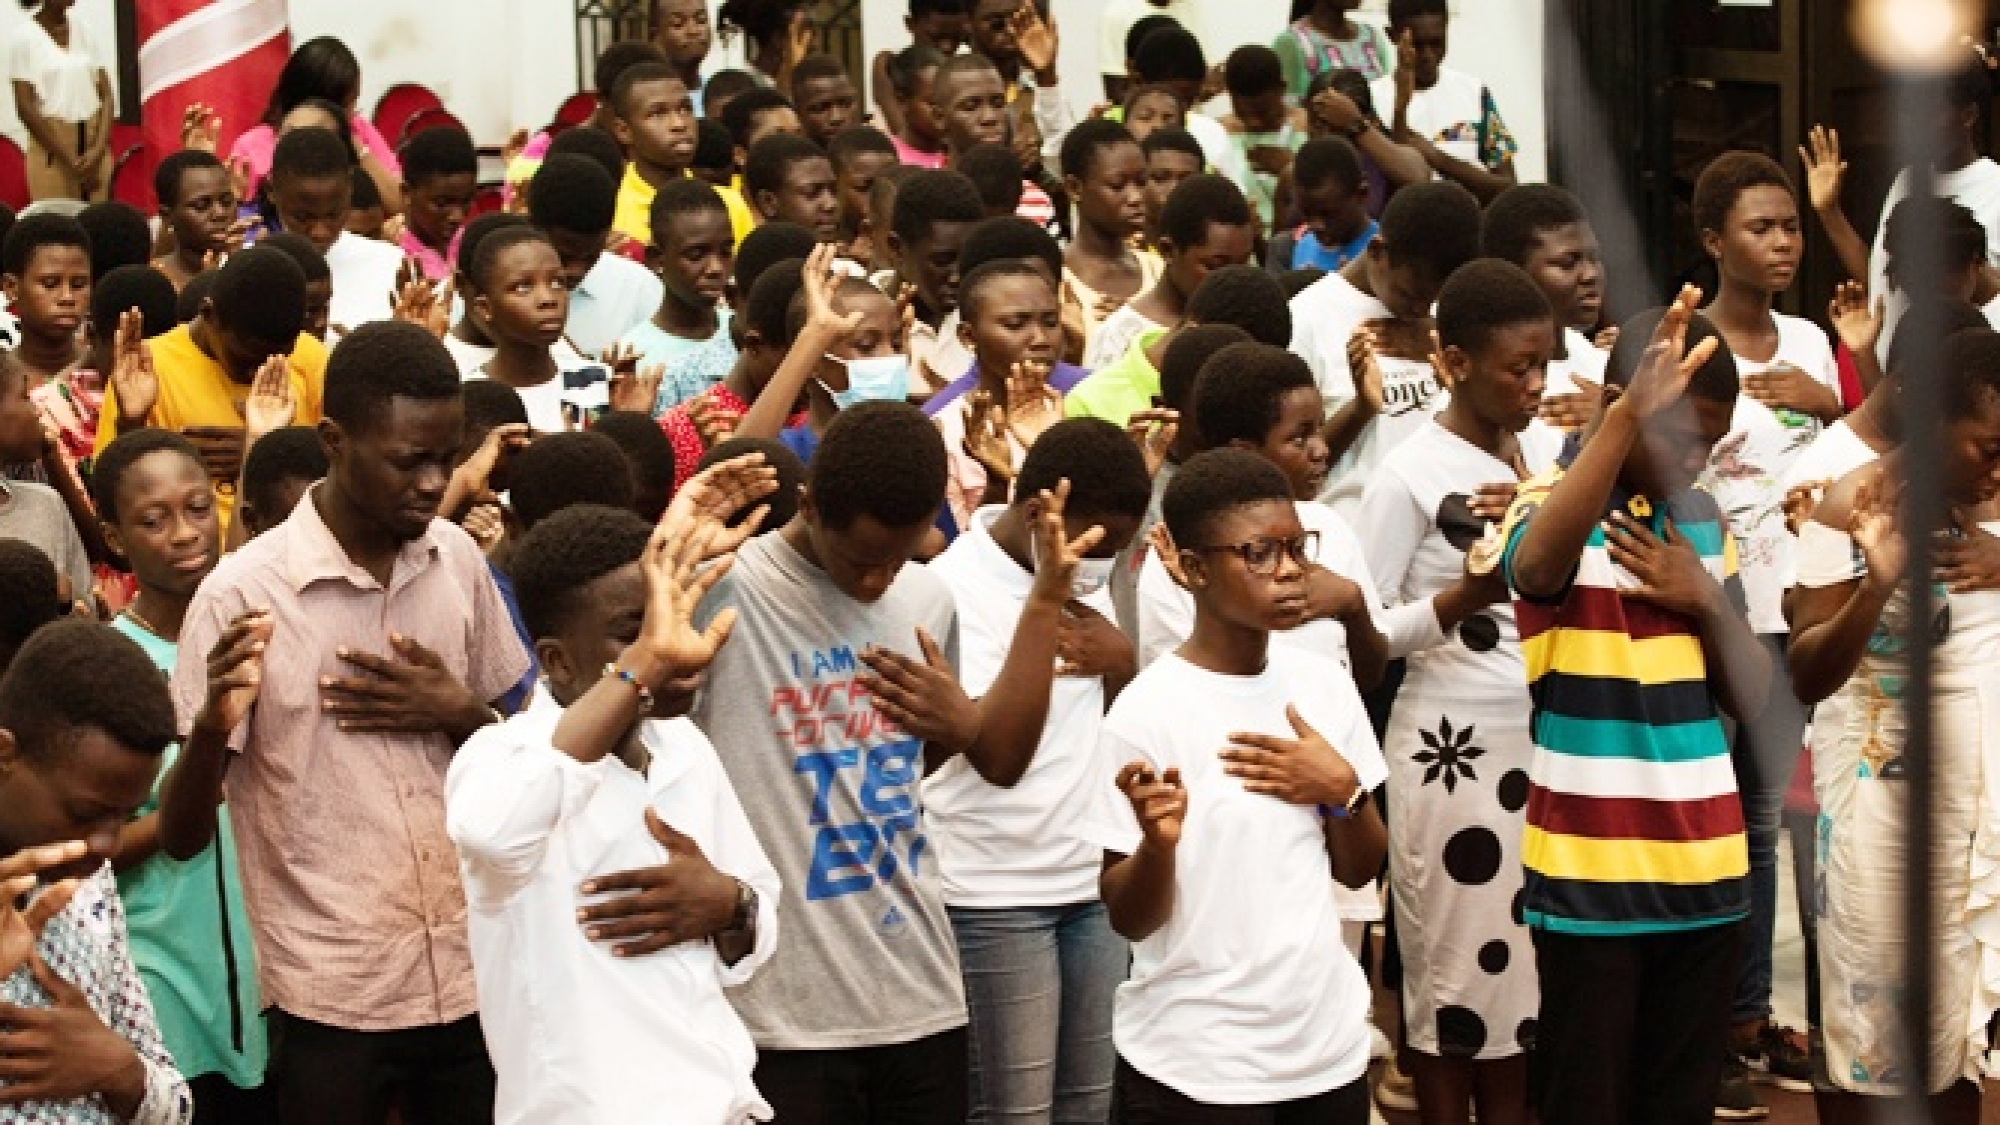 Youth Ministry Launches Nationwide “Teens Evangelism” Drive